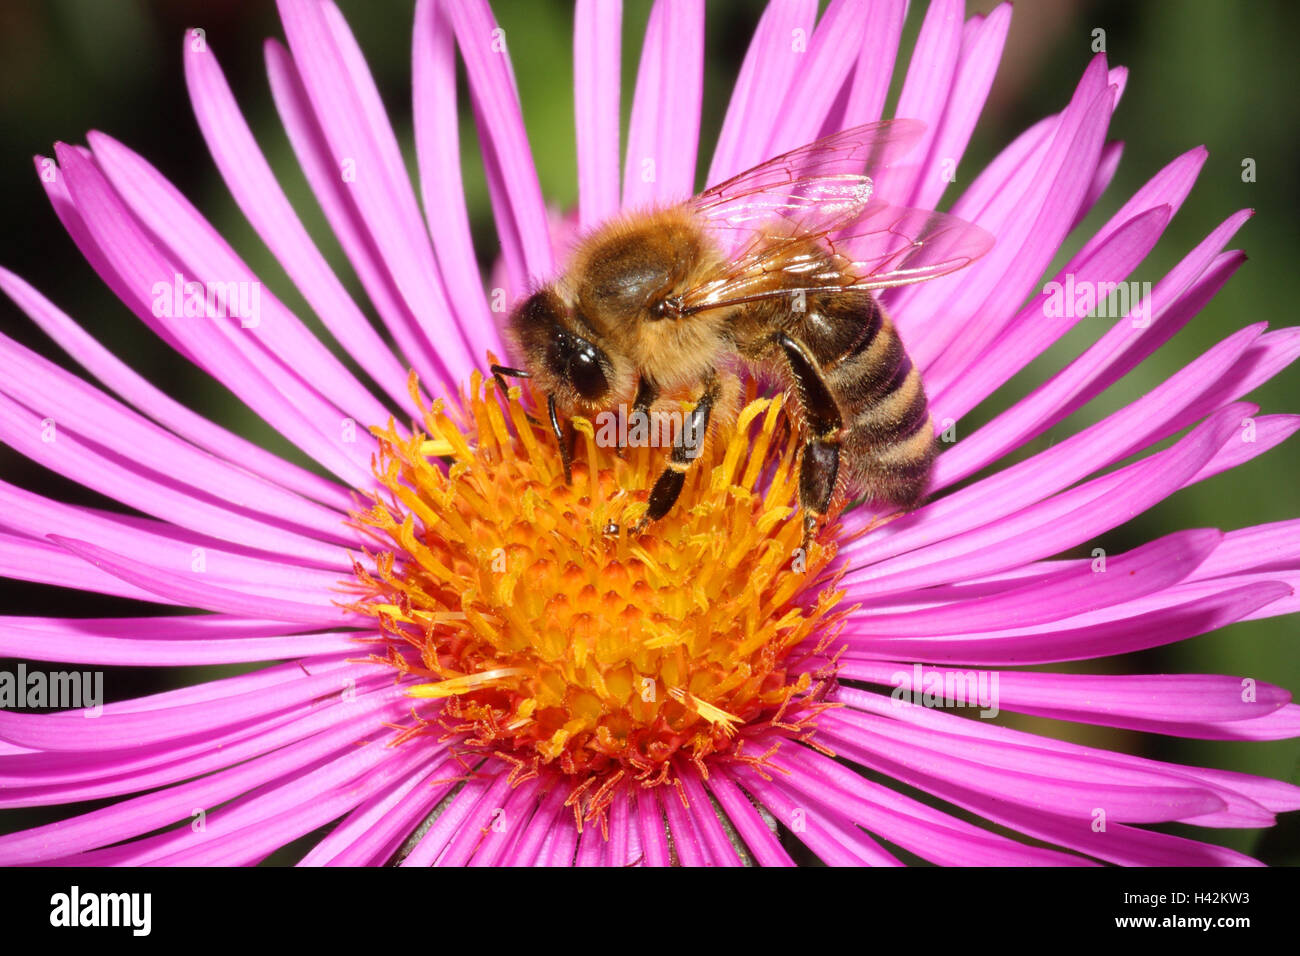 Autumn aster, blossom, honeybee, plants, cultivated plants, ornamental plants, flowers, composites, aster, pink, orange, animals, insects, bee, hymenoptera, worker bees, food search, dust, pollen, nectar, collect, diligently, medium close-up, outside, Stock Photo